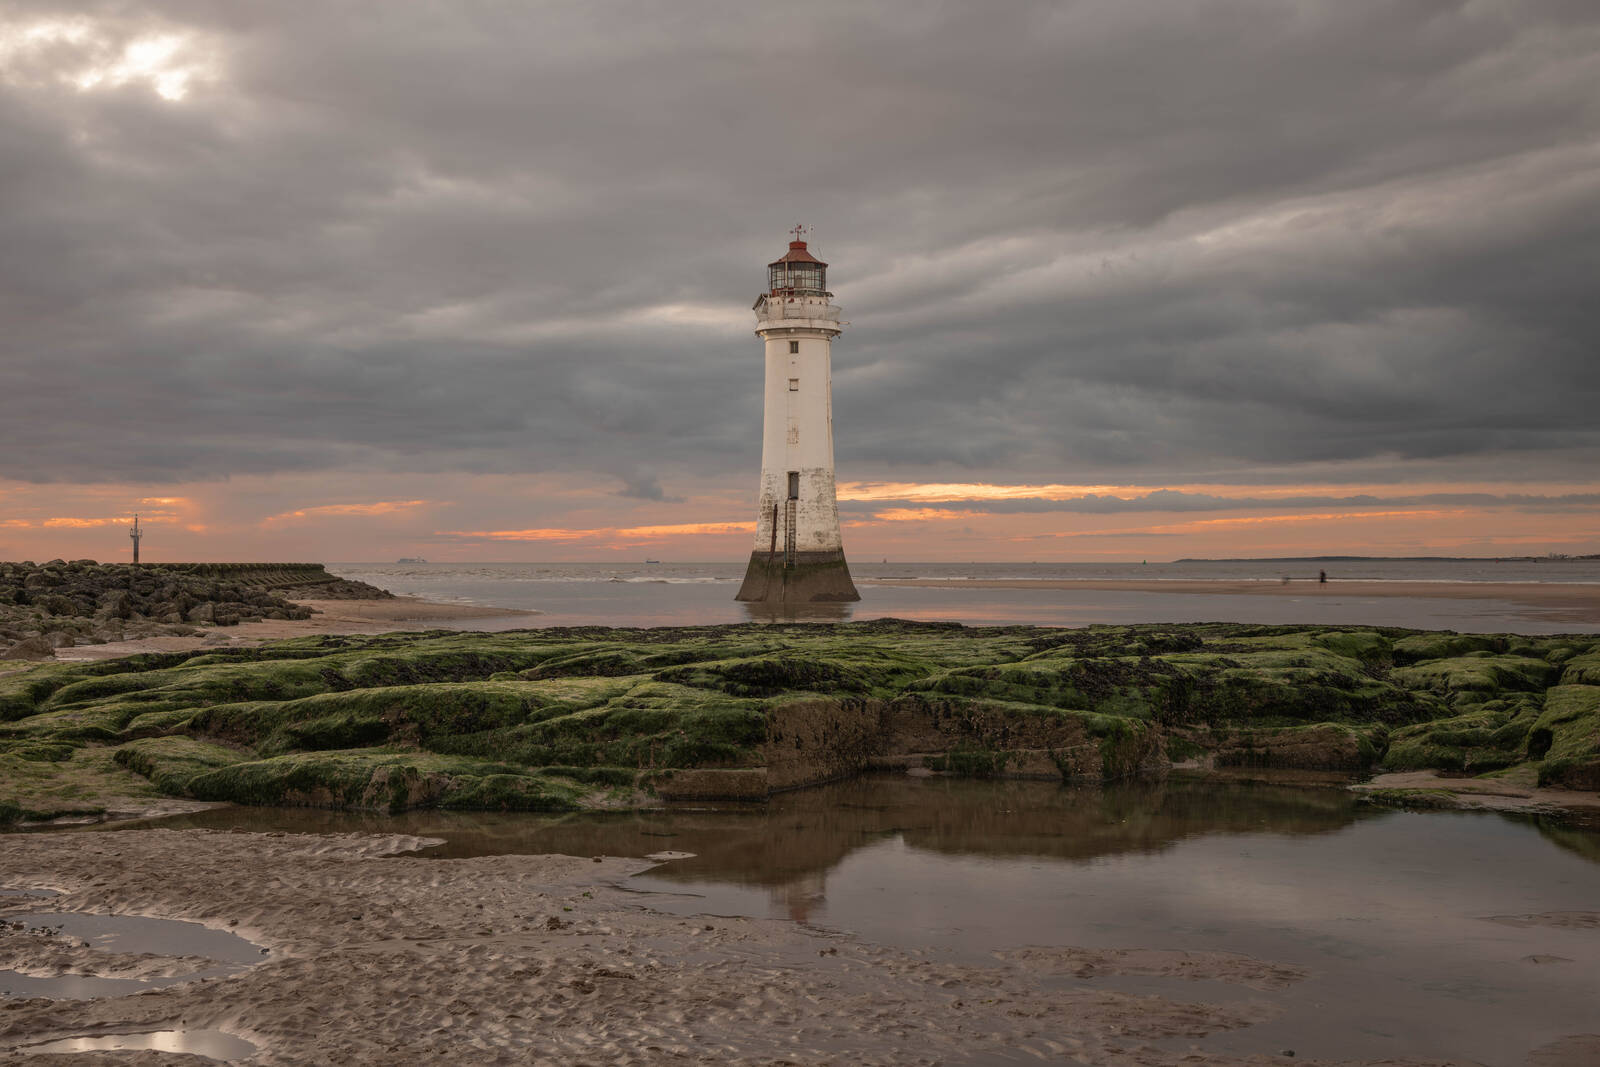 Image of New Brighton Lighthouse & Fort Perch Rock by michael bennett